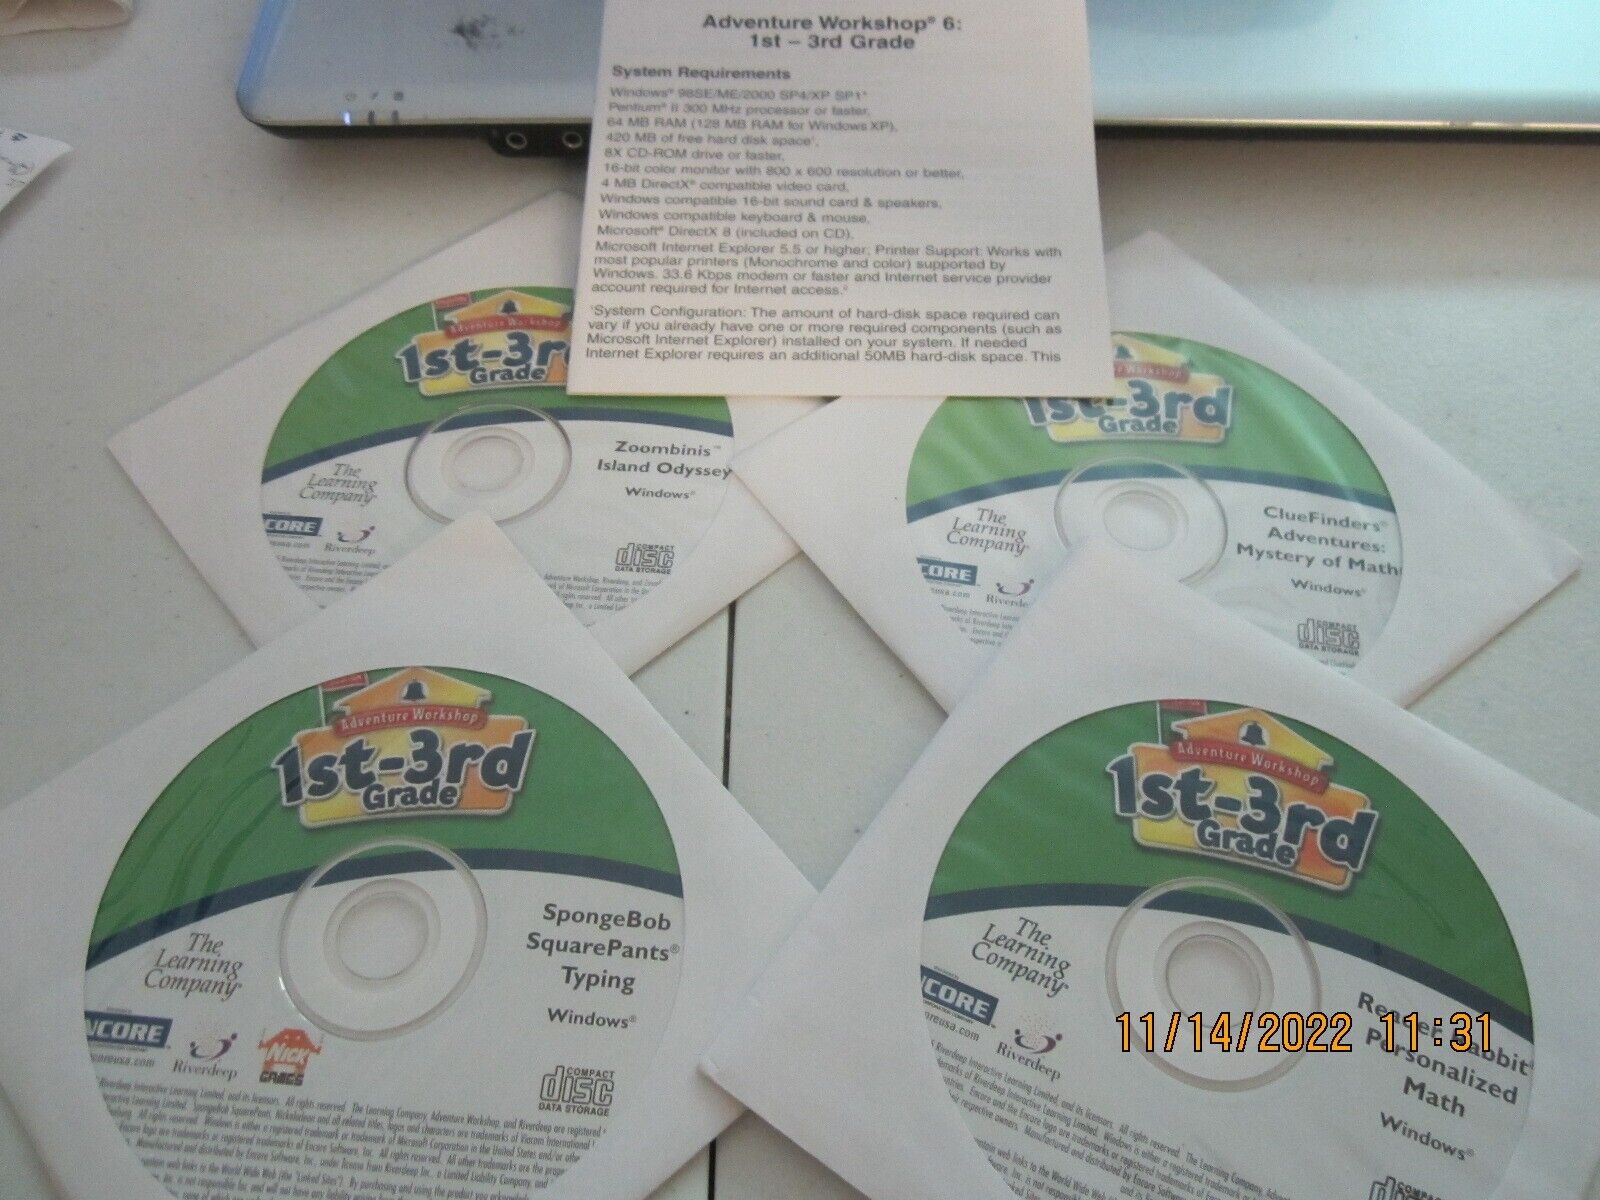 Adventure Workshop 1st-3rd Grade /The Learning Company /4 CD Rom Set /2005/Guide